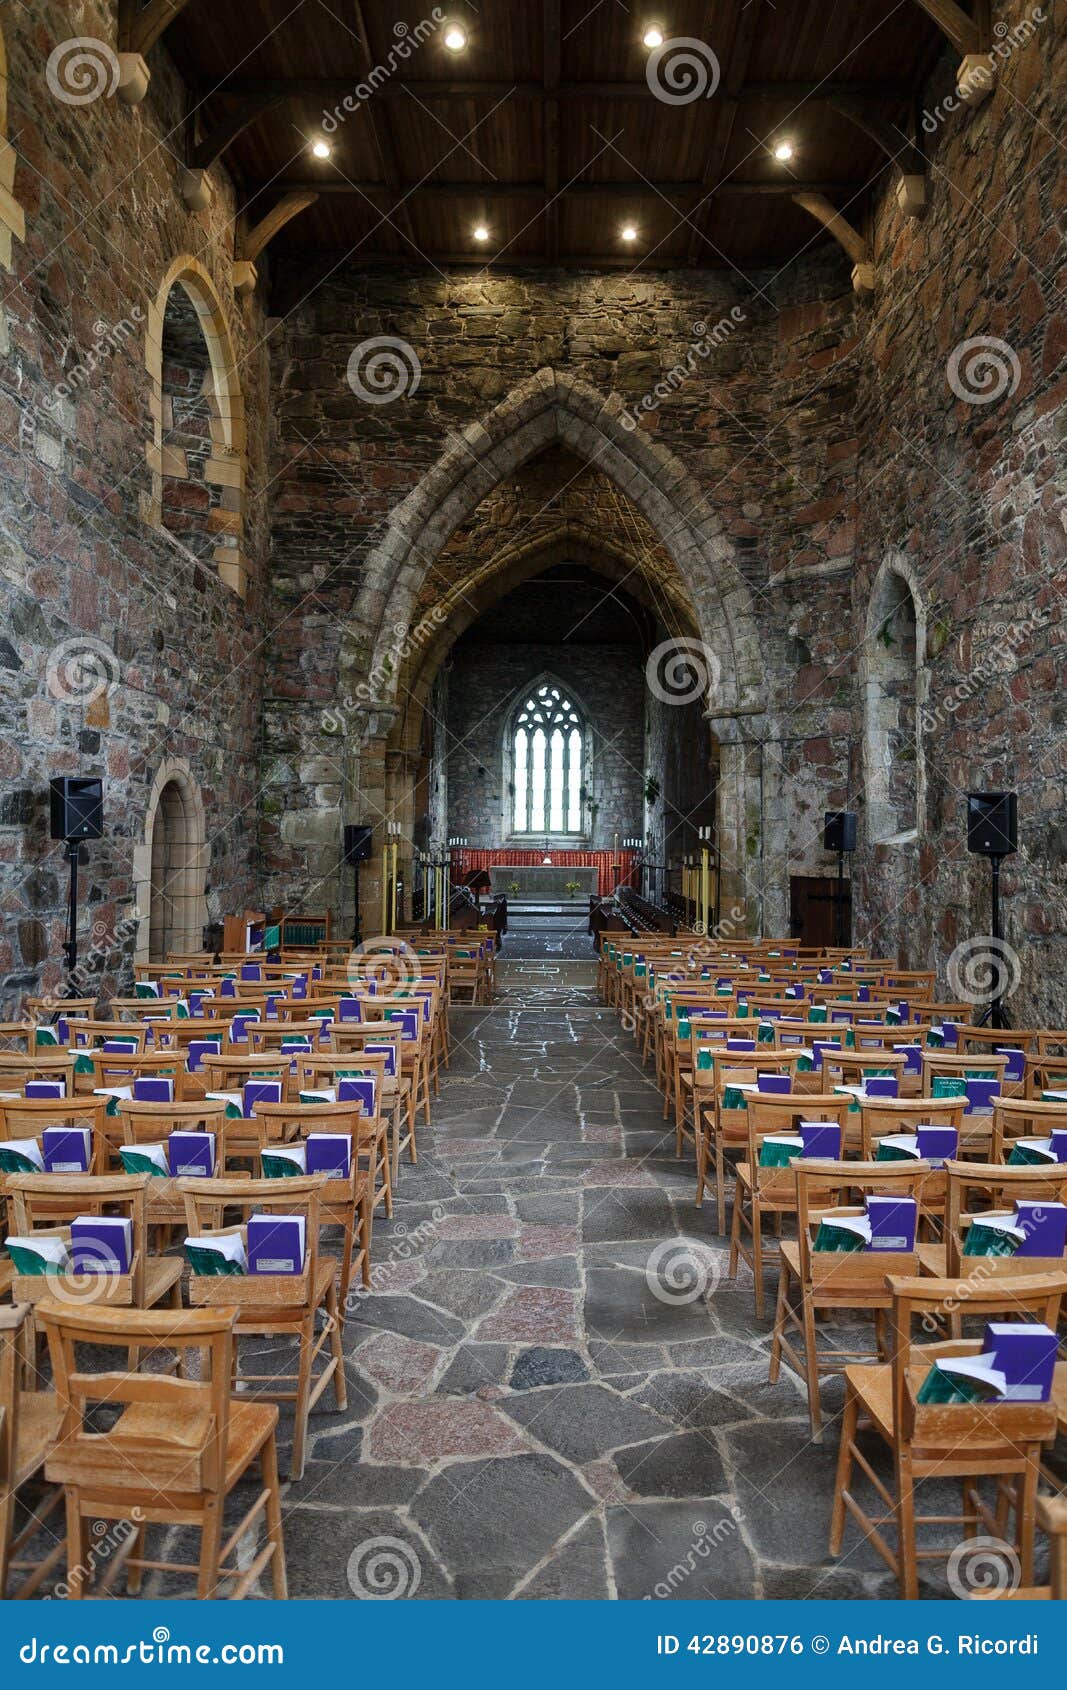 iona, the nave of the abbey church